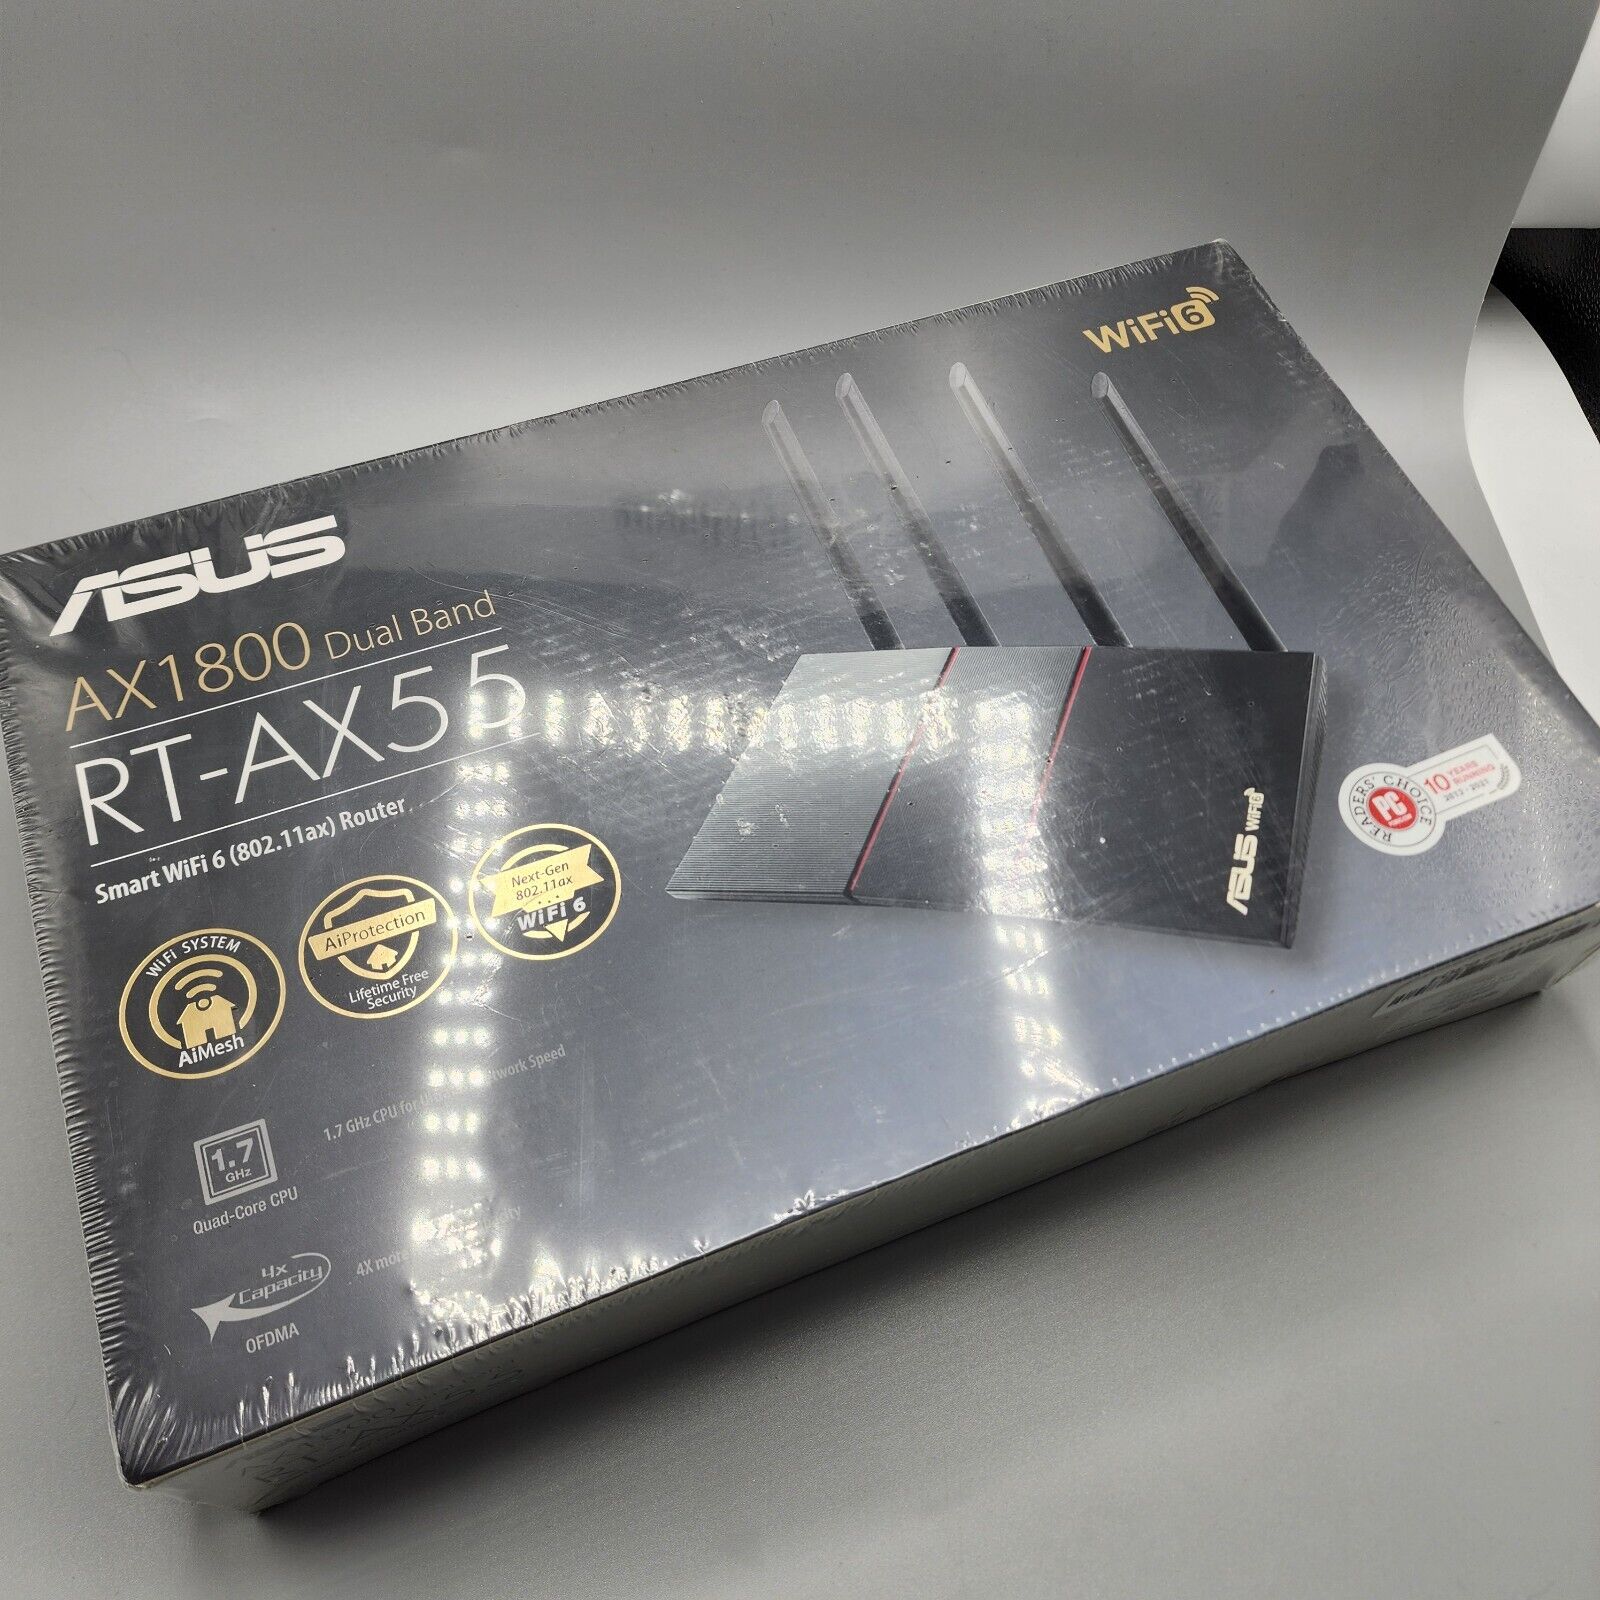 ASUS RT-AX55 (AX1800) Dual Band WiFi 6 Extendable Router / SEALED